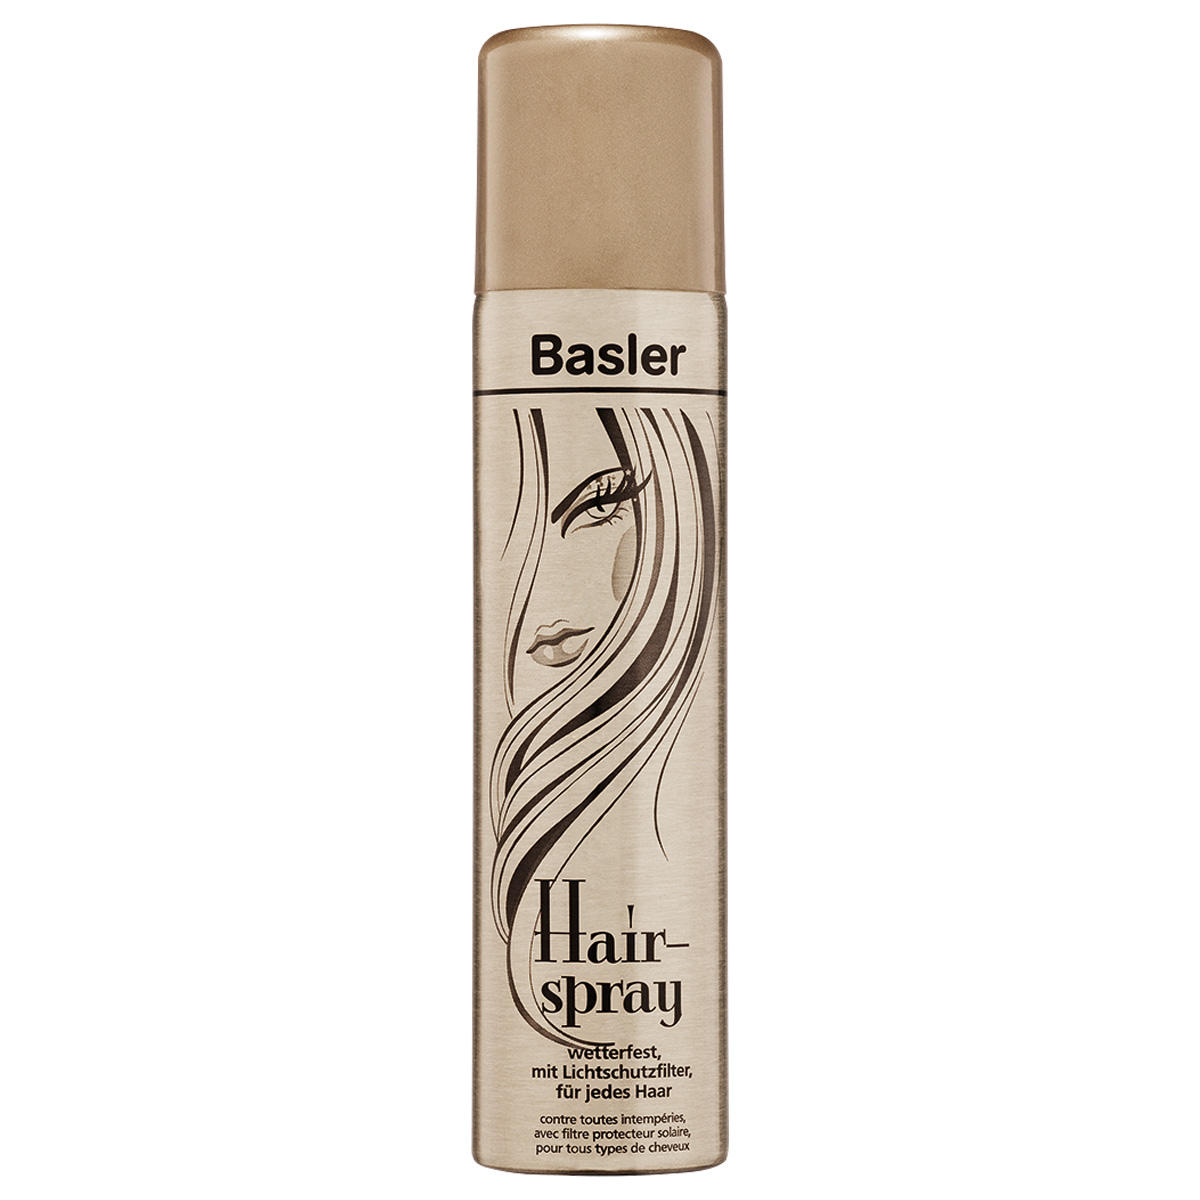 Basler Hairspray with light protection filter Aerosol can 75 ml